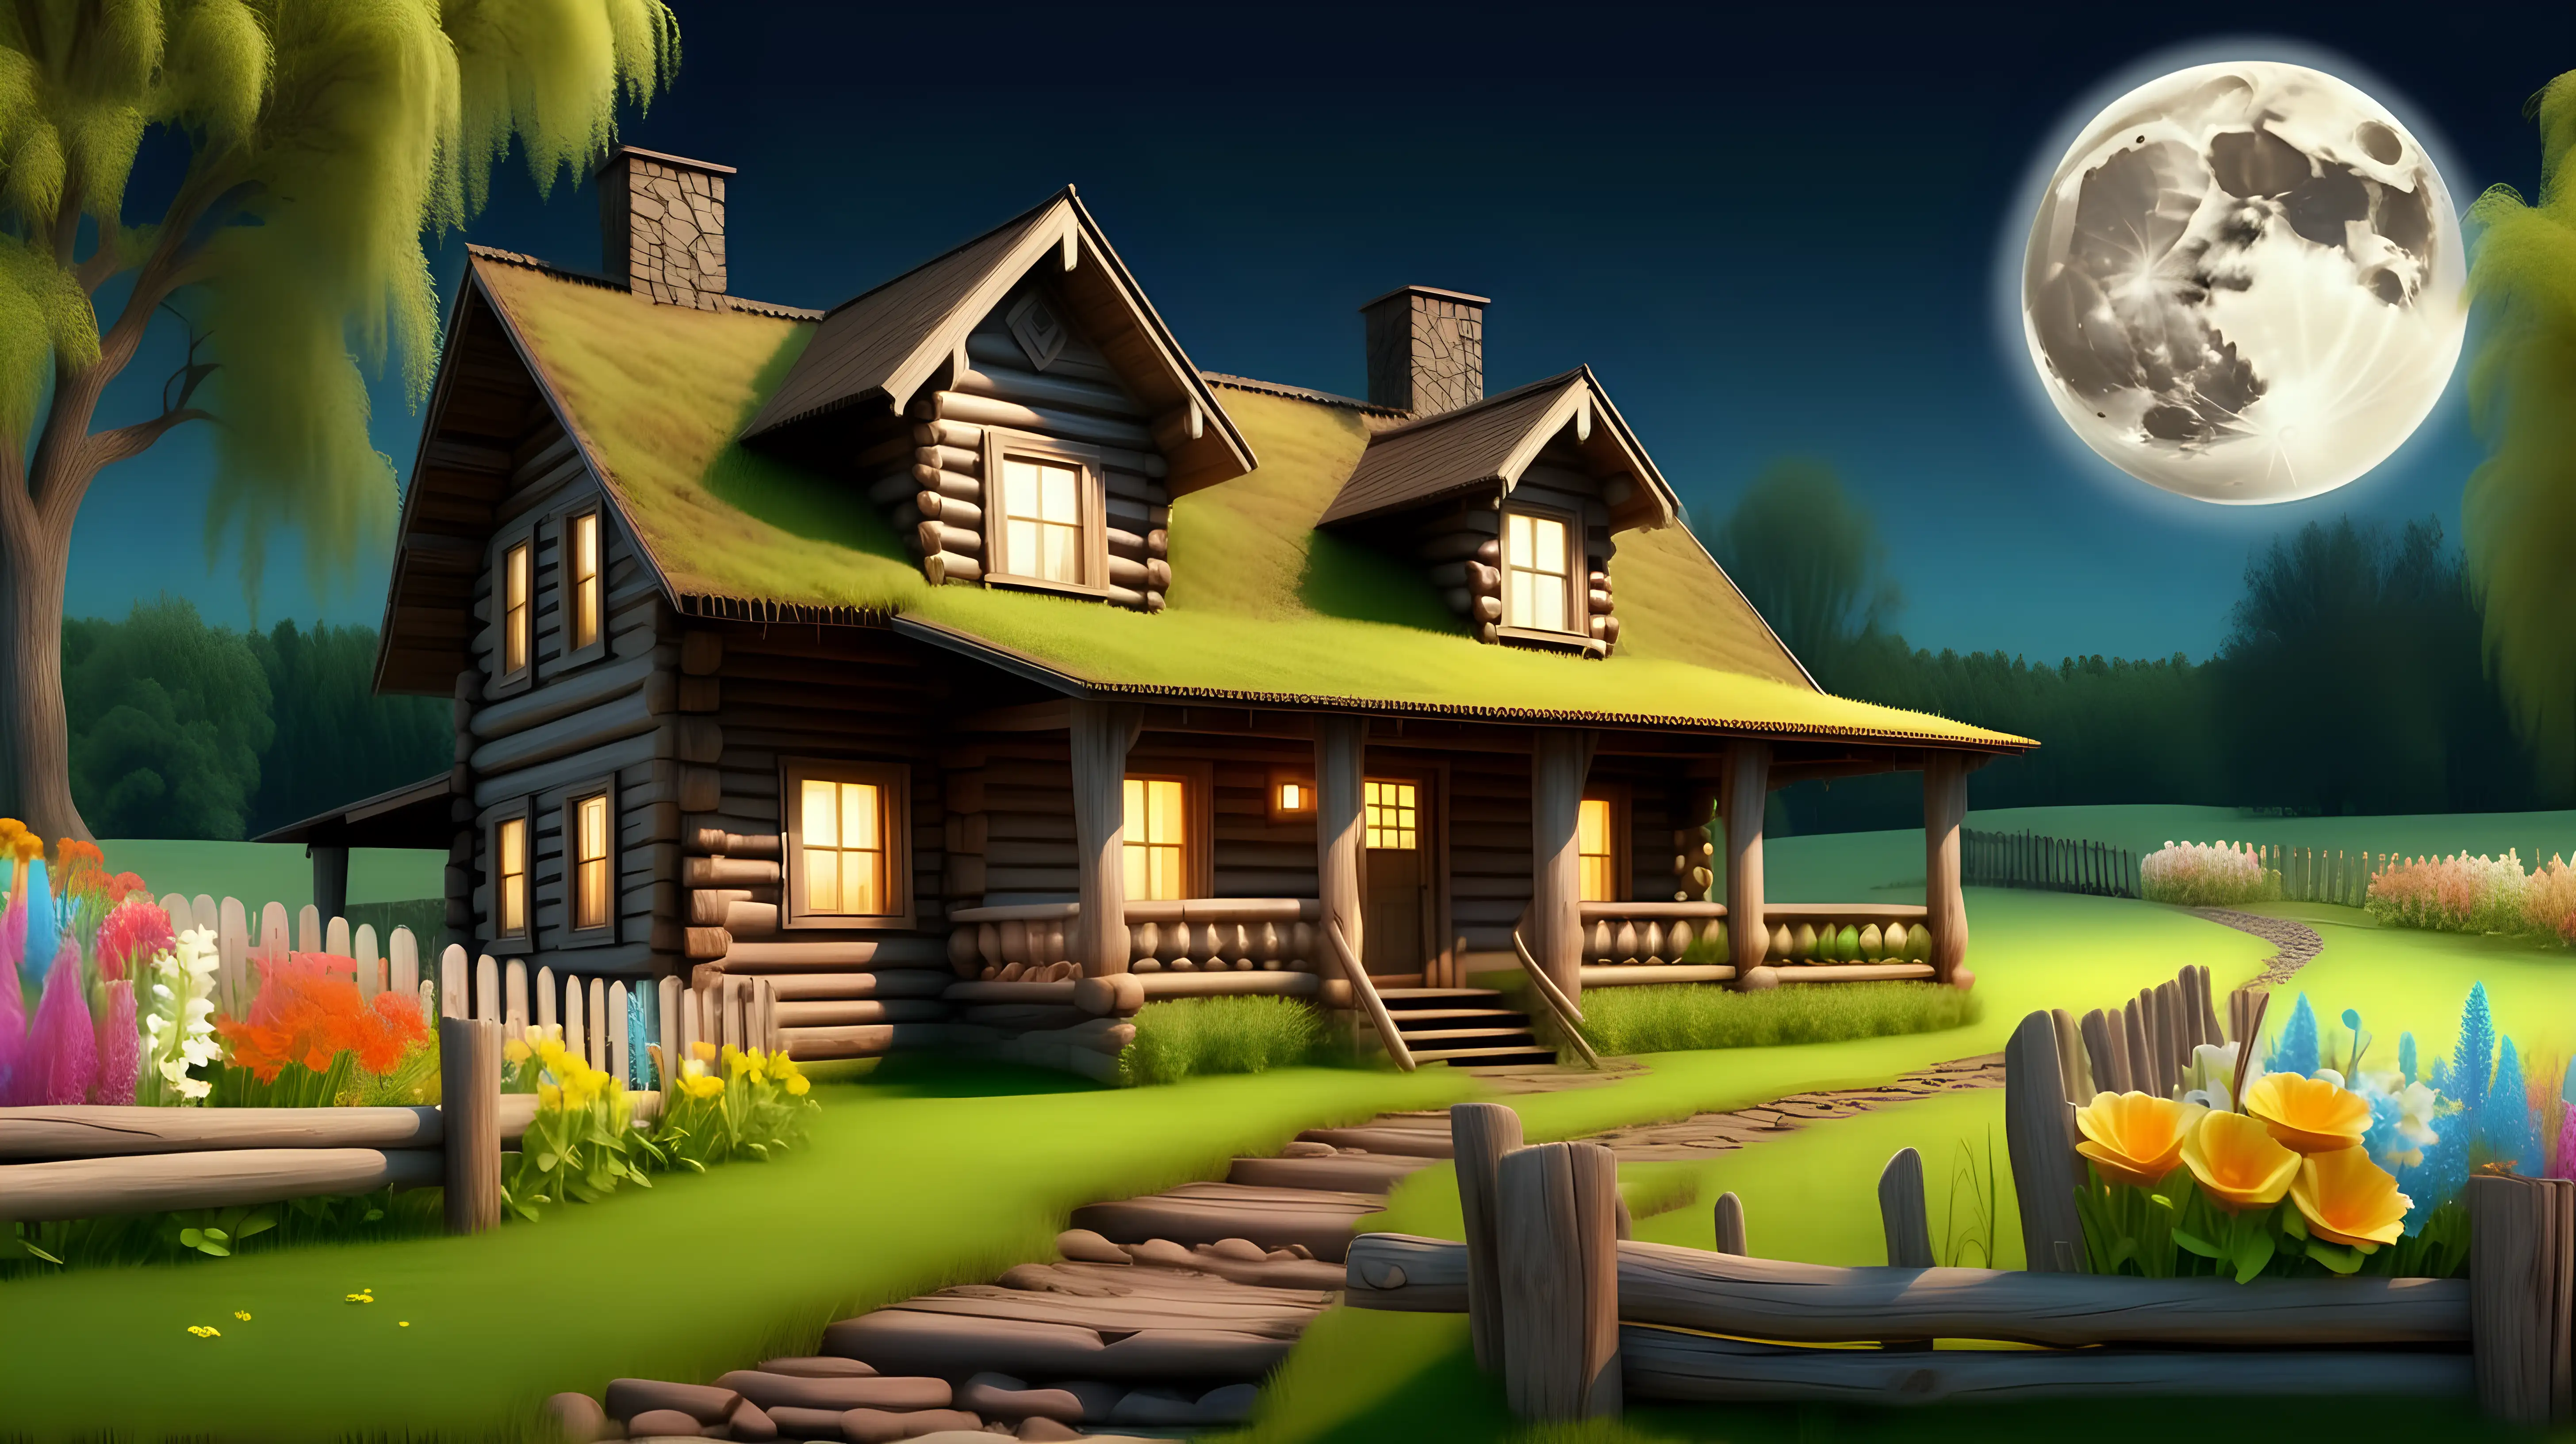 Enchanting Night at a Quaint Wooden Cottage with Moonlight Glow